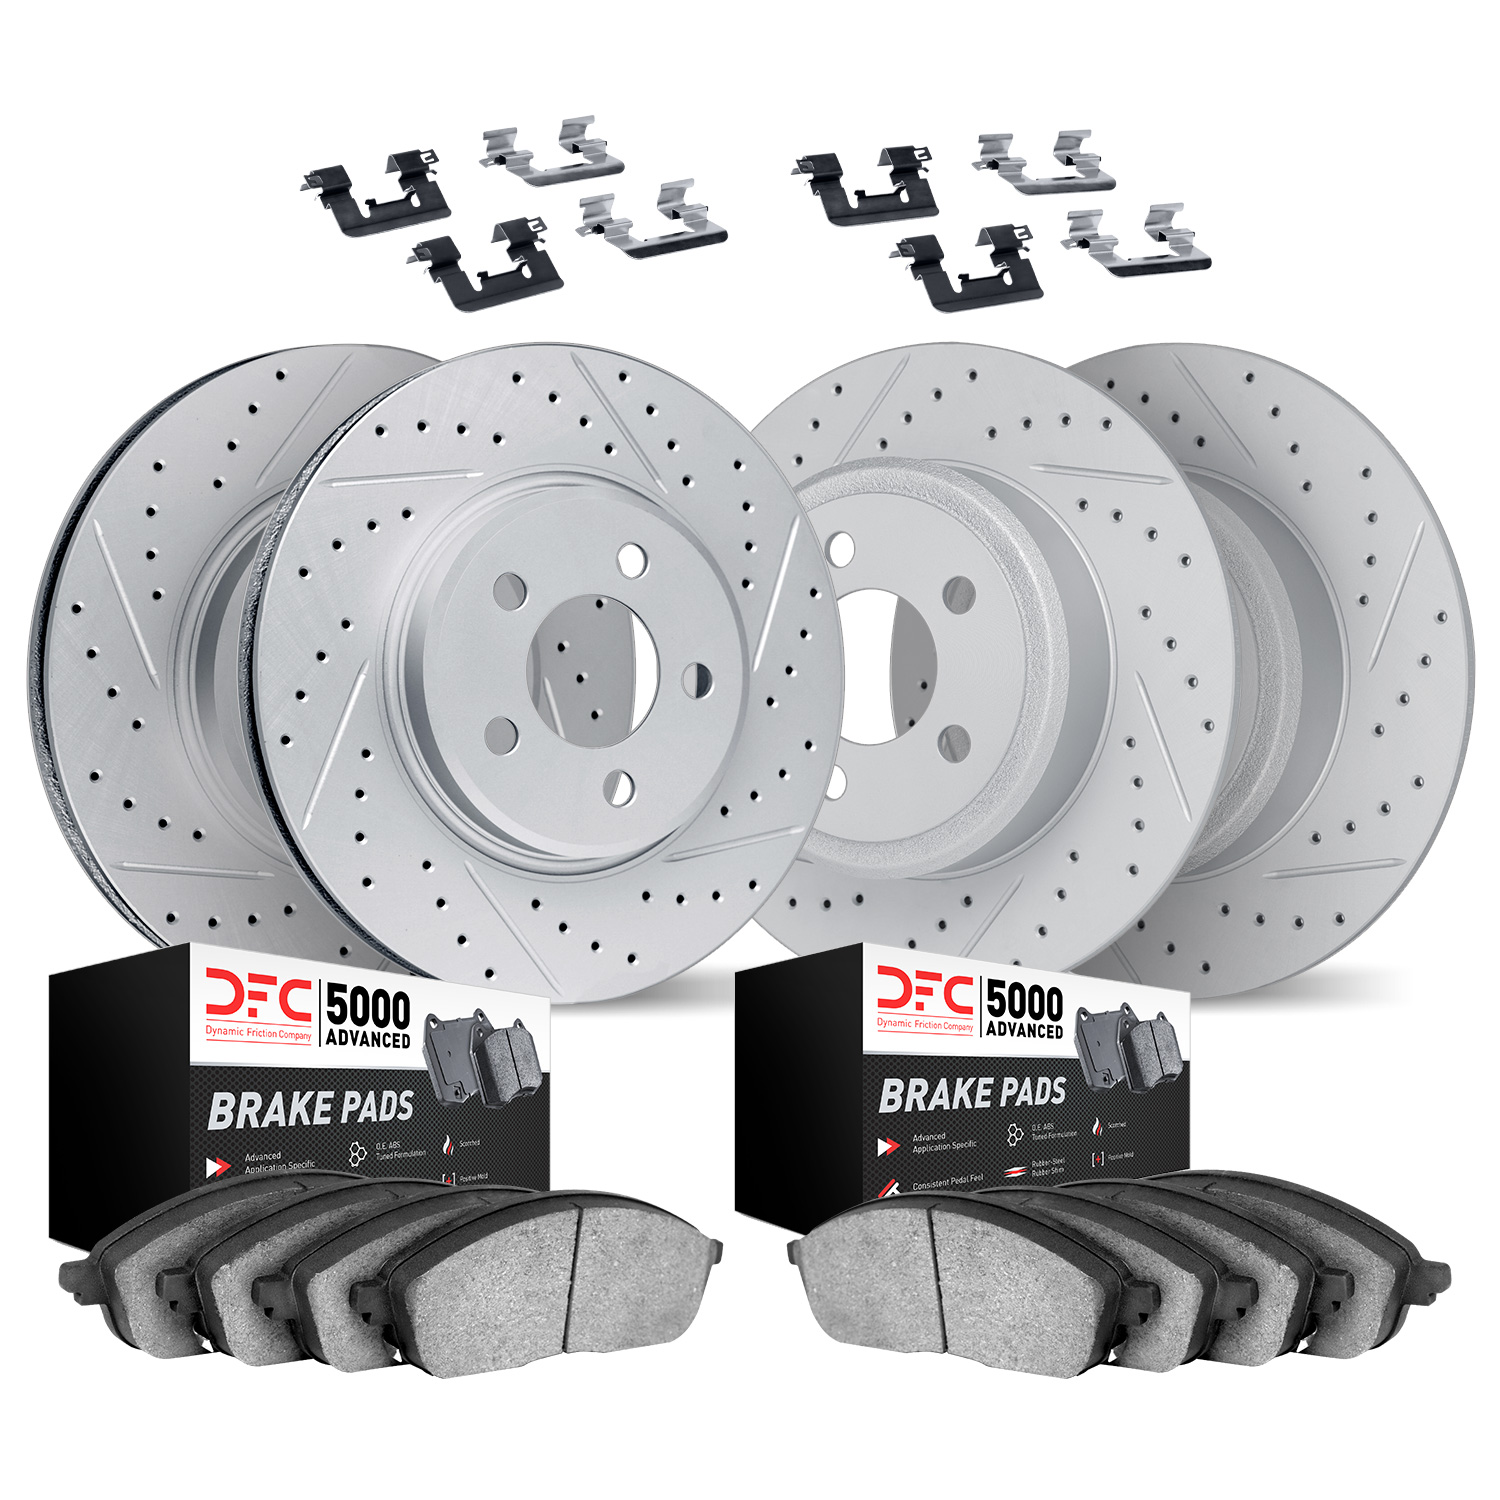 2514-58019 Geoperformance Drilled/Slotted Rotors w/5000 Advanced Brake Pads Kit & Hardware, 2014-2016 Acura/Honda, Position: Fro